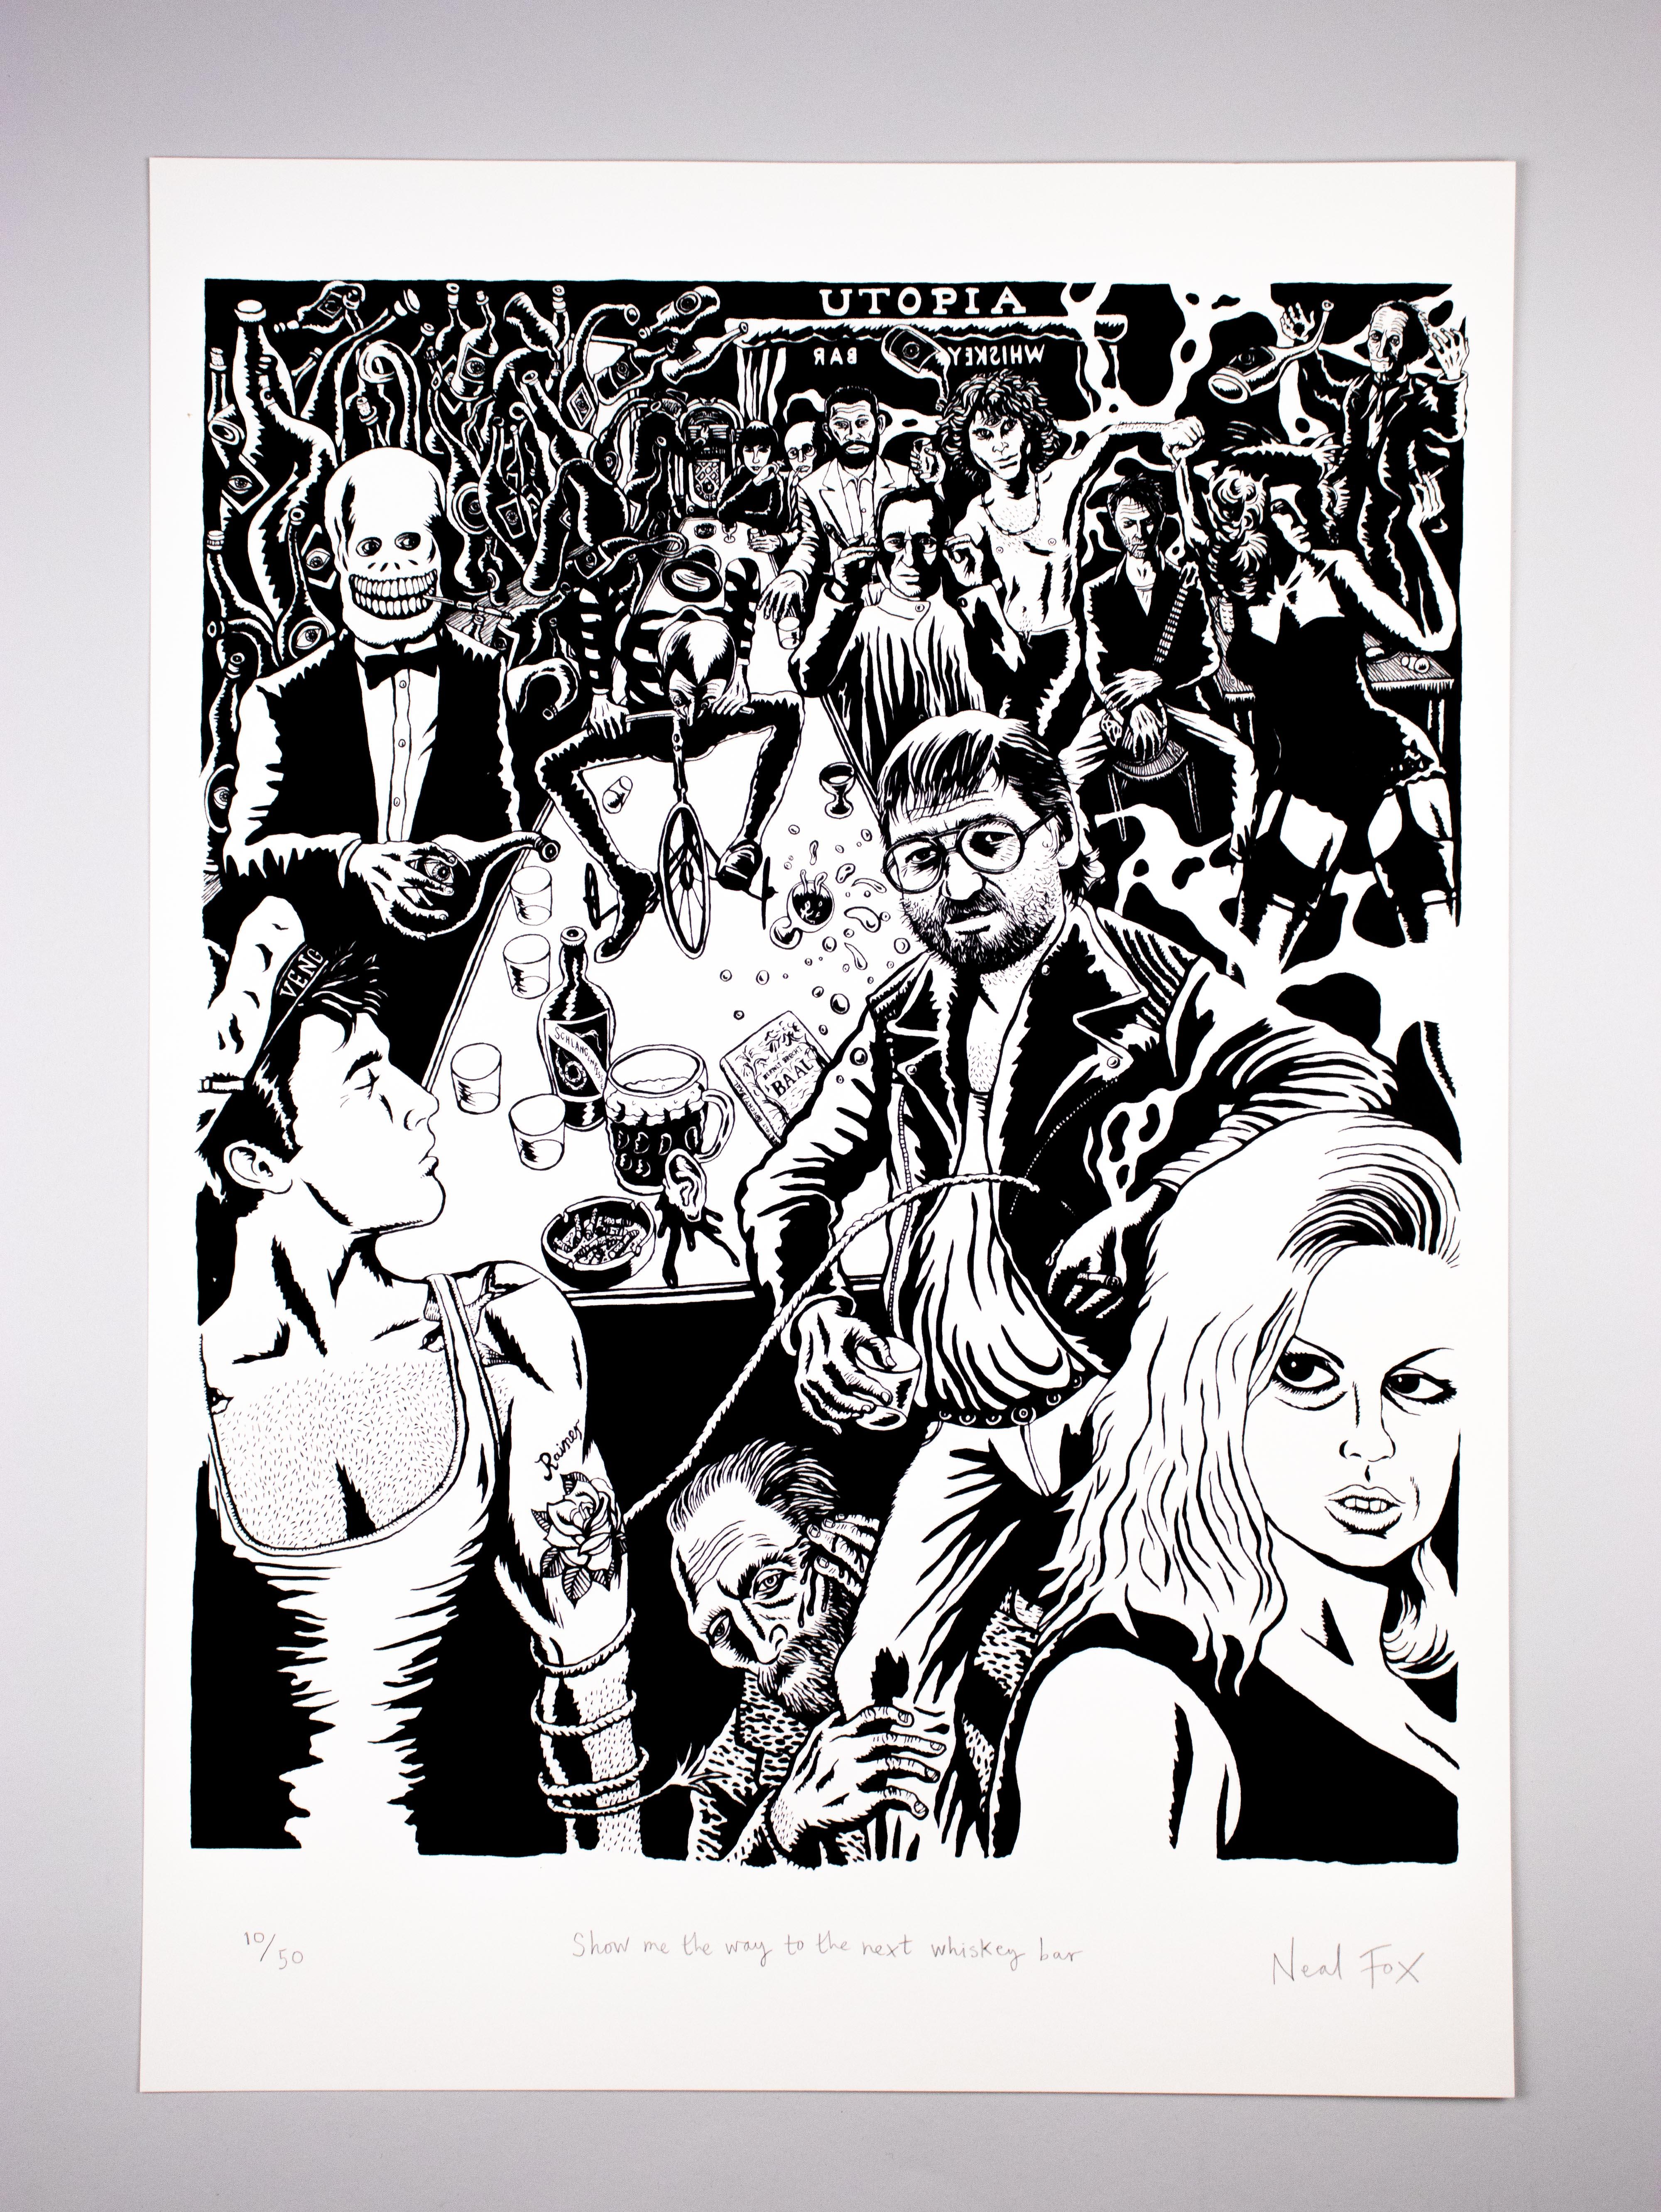 NEAL FOX
Show Me the Way to the Next Whiskey Bar

2015
Beautiful b/w lithograph on thick paper
Limited edition of 50 (here: 10/50)
59.5 x 44.5 cm
Hand-signed, -numbered, and -titled by the artist

The picture shows pop culture's greatest figures